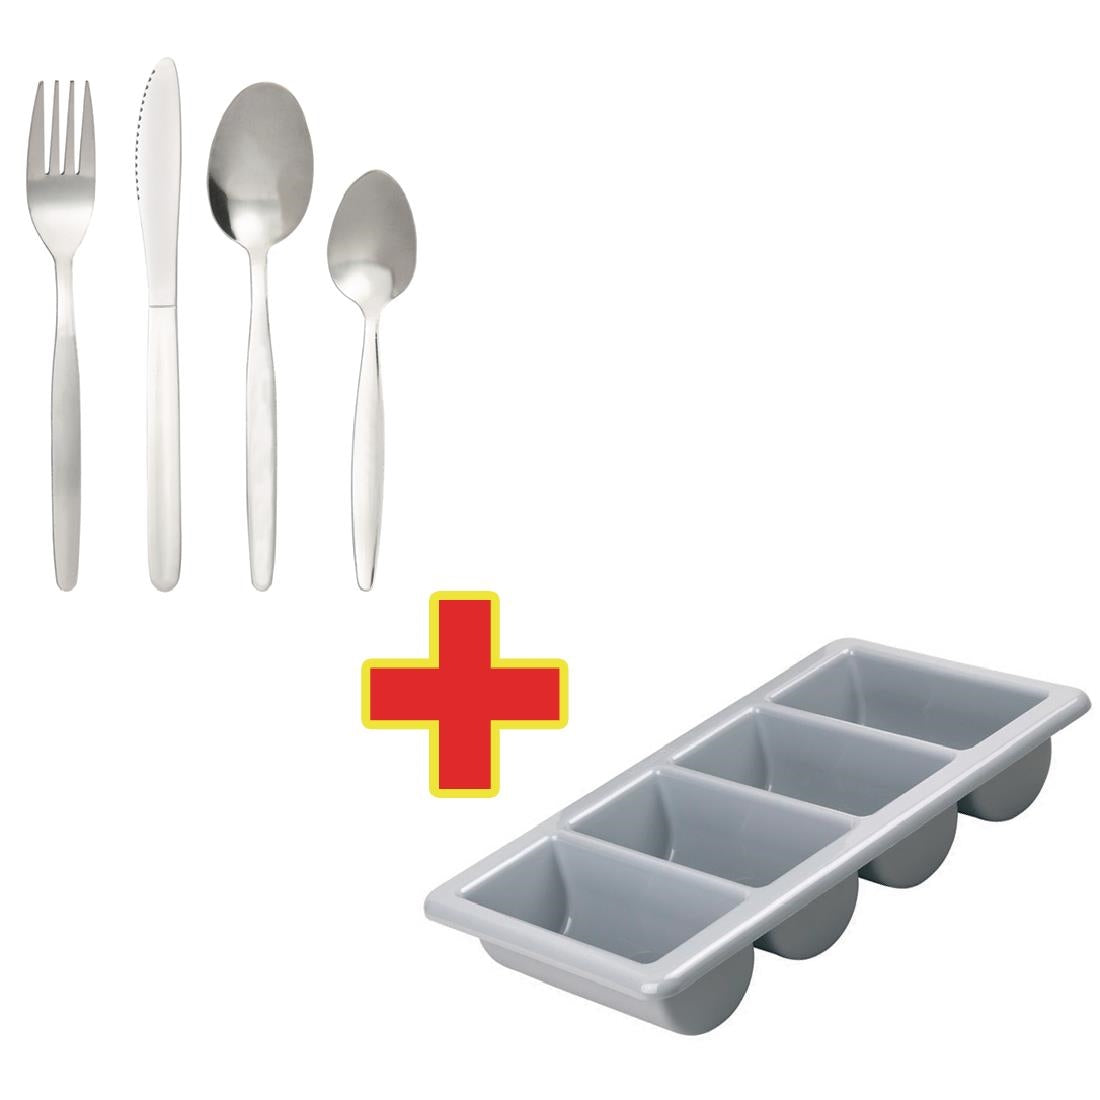 S274 Special Offer Olympia Kelso Cutlery with Tray Combo Deal (Pack of 240)